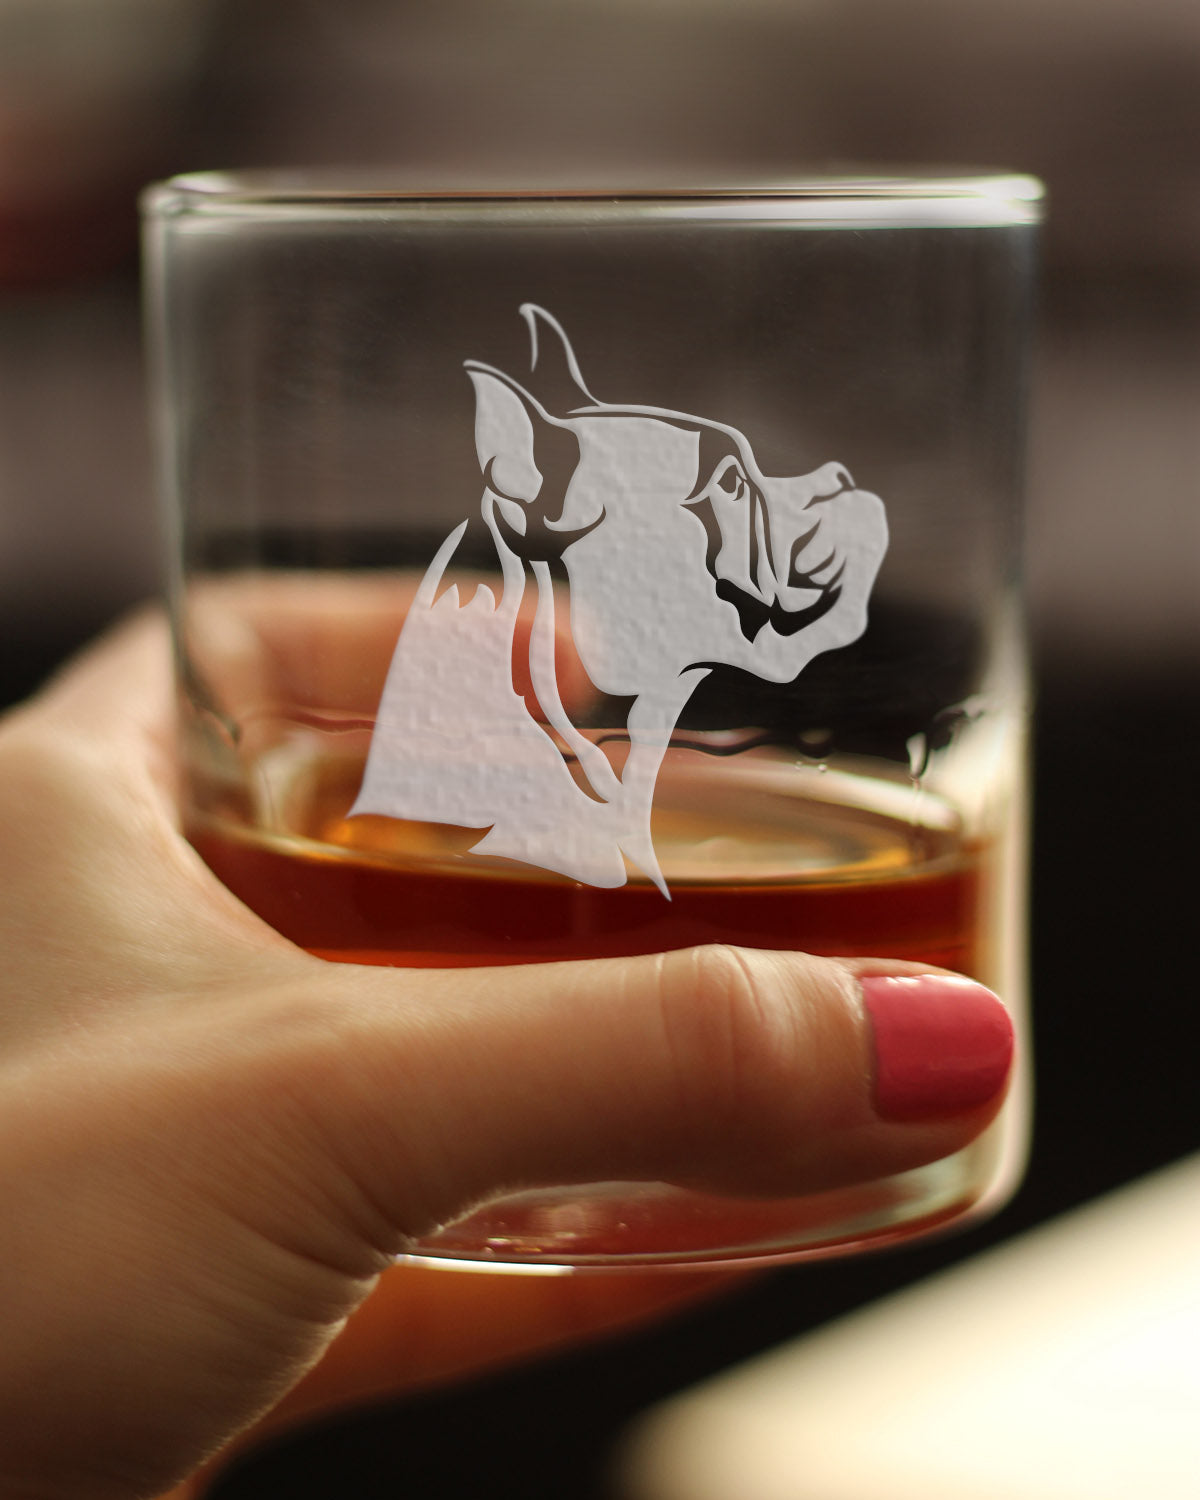 Boxer with Pointed Ears - Whiskey Rocks Glass - Unique Boxer Themed Dog Gifts and Party Decor for Women and Men - 10.25 Oz